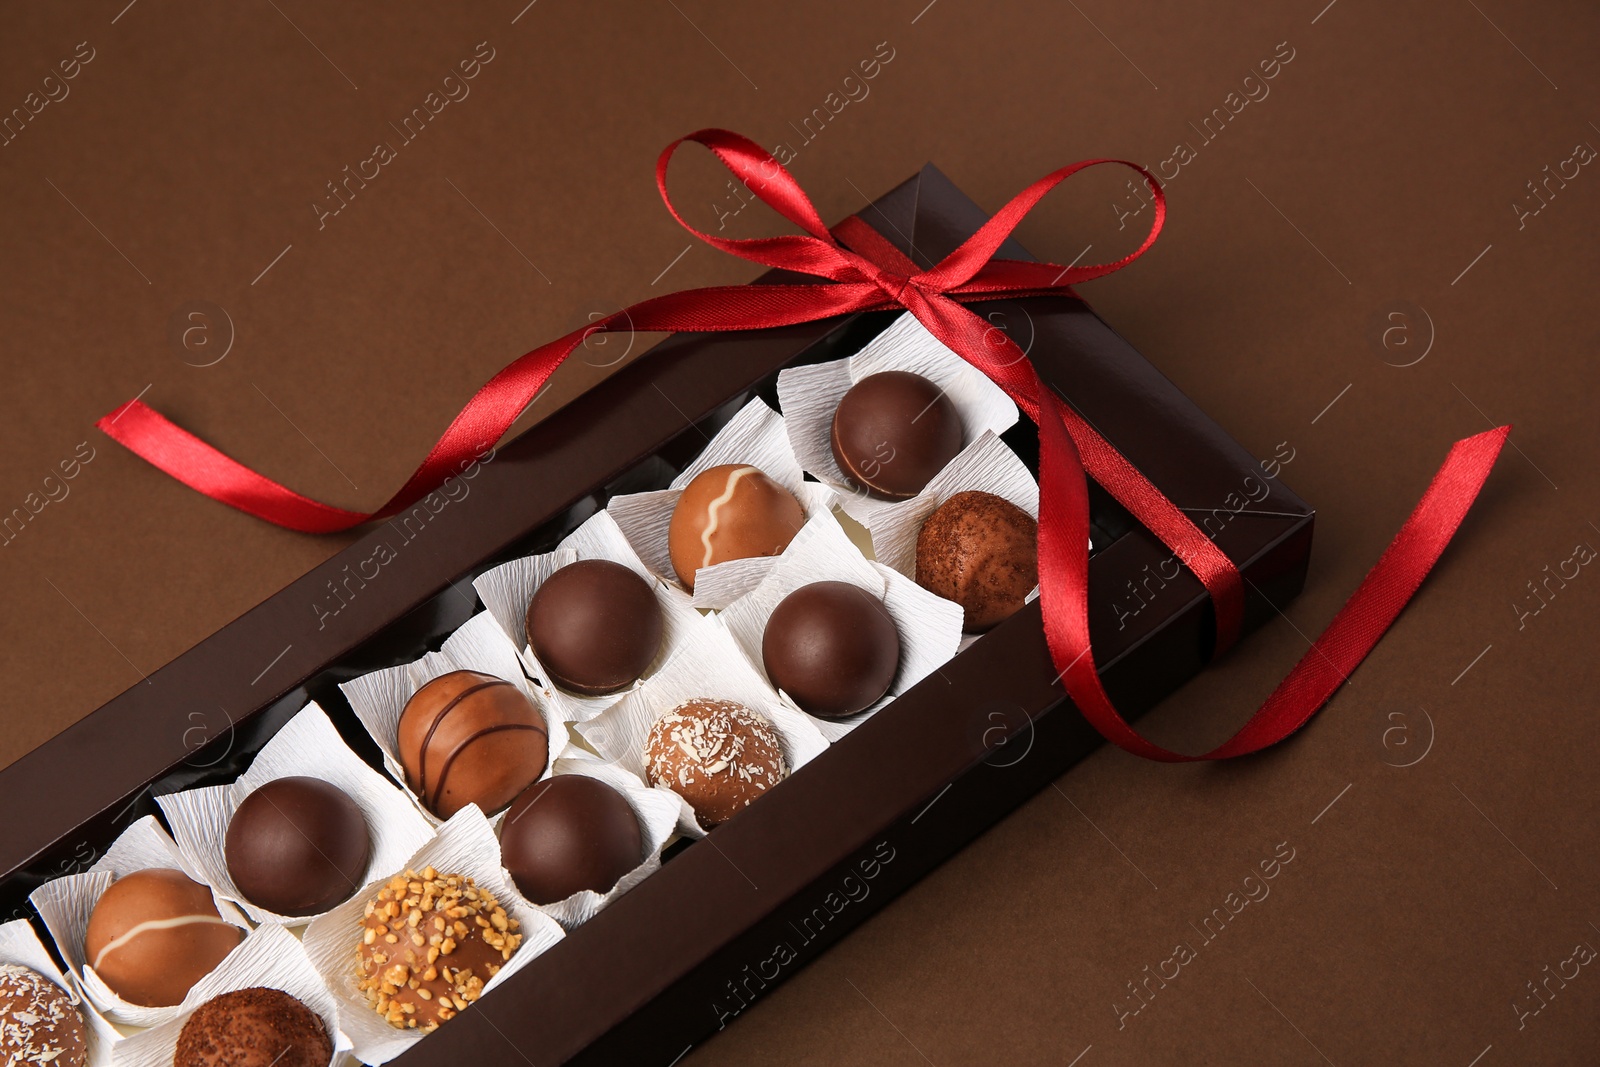 Photo of Box with delicious chocolate candies on brown table, closeup